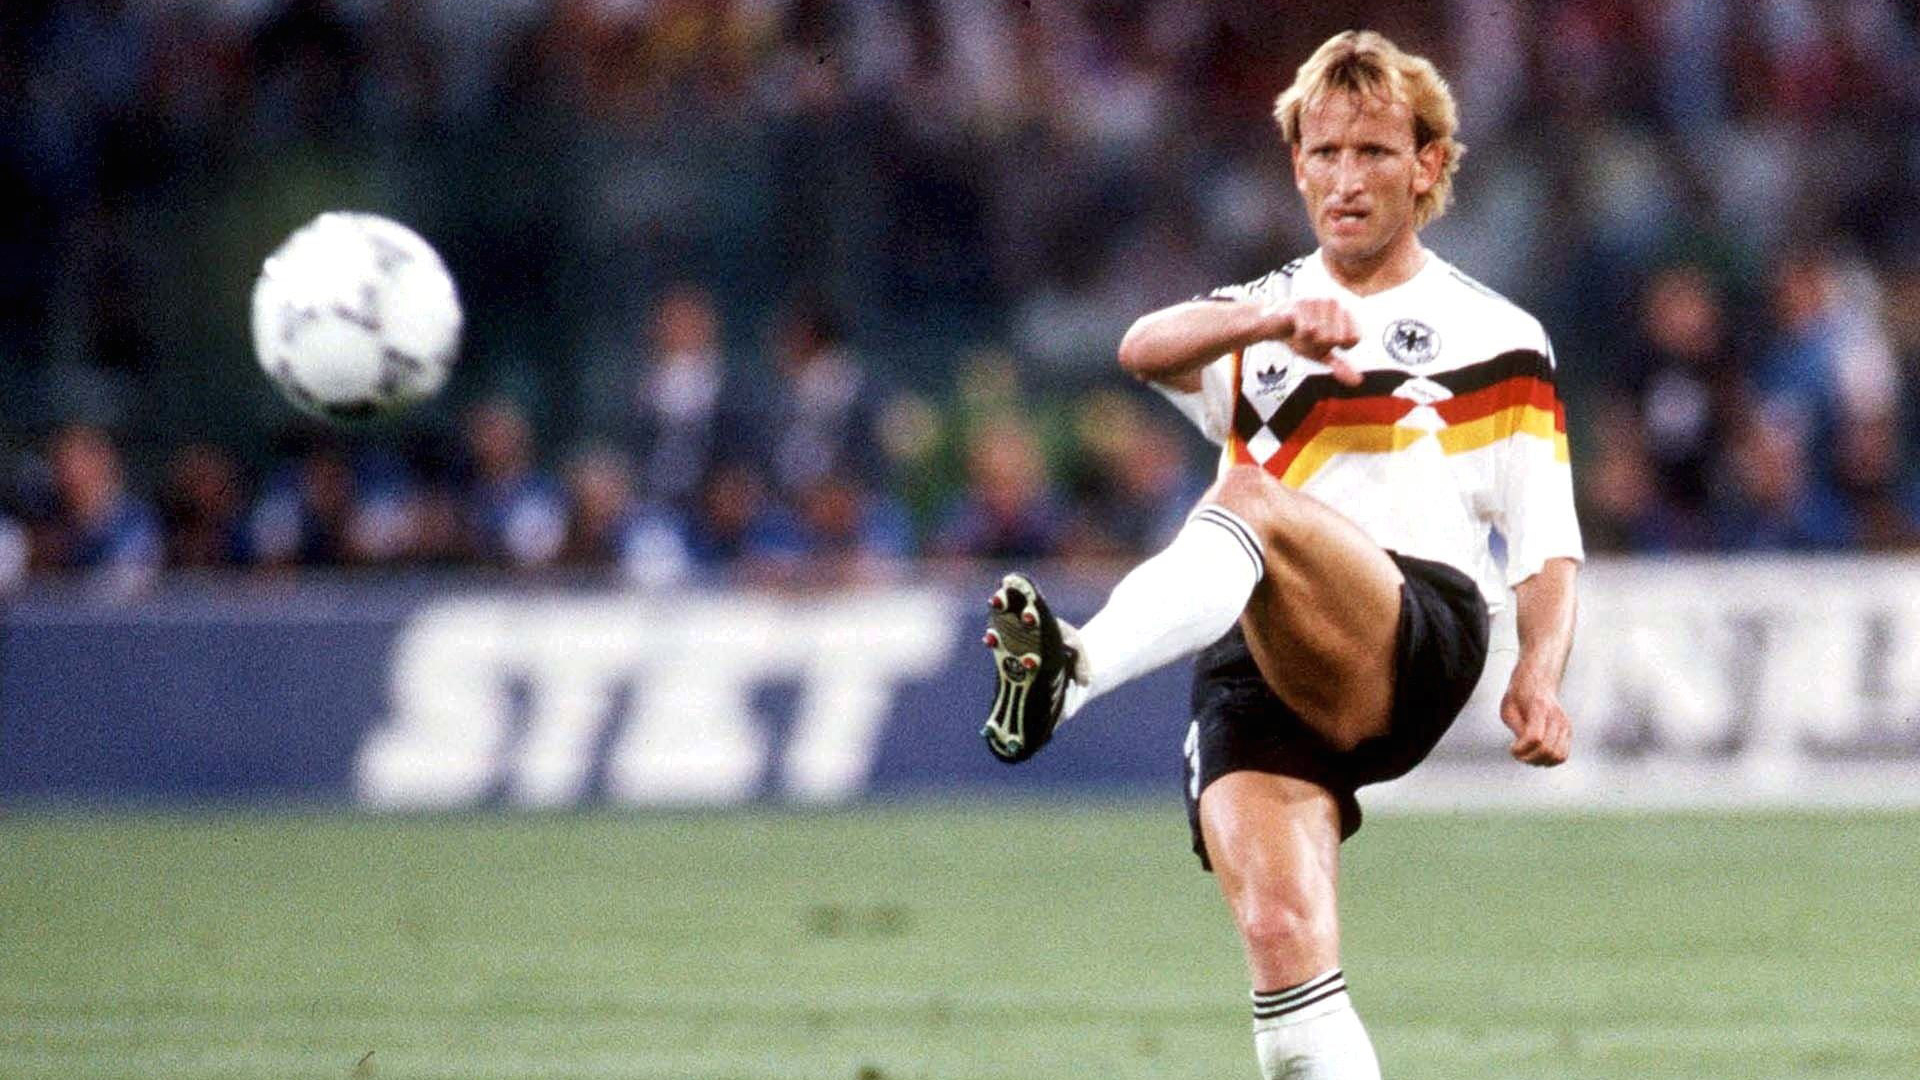 Andreas Brehme Germany v Argentina FIFA World Cup 07081990 (Lutz Bongarts/Bongarts/Getty Images)